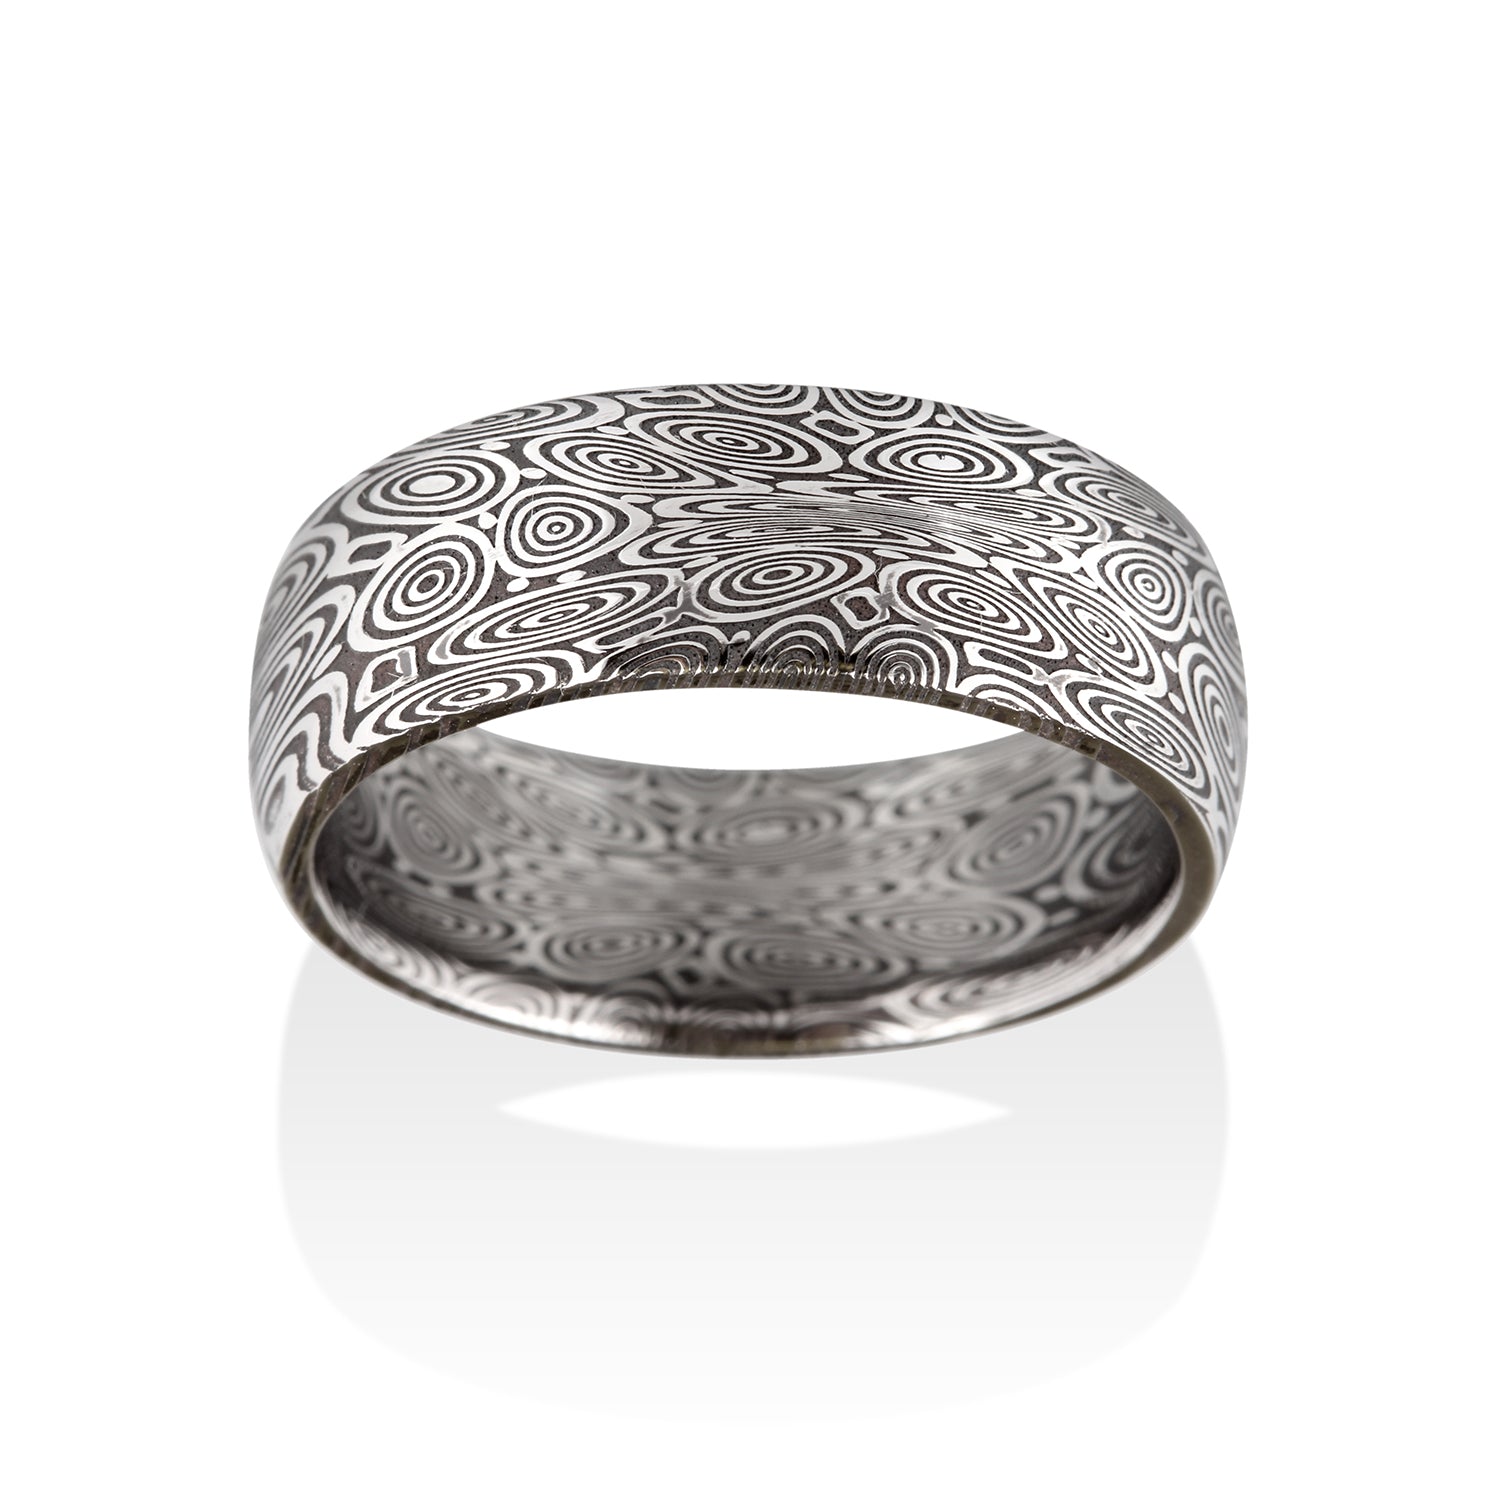 Remington Oxidized Damascus Steel Ring by Chris Ploof - Talisman Collection Fine Jewelers